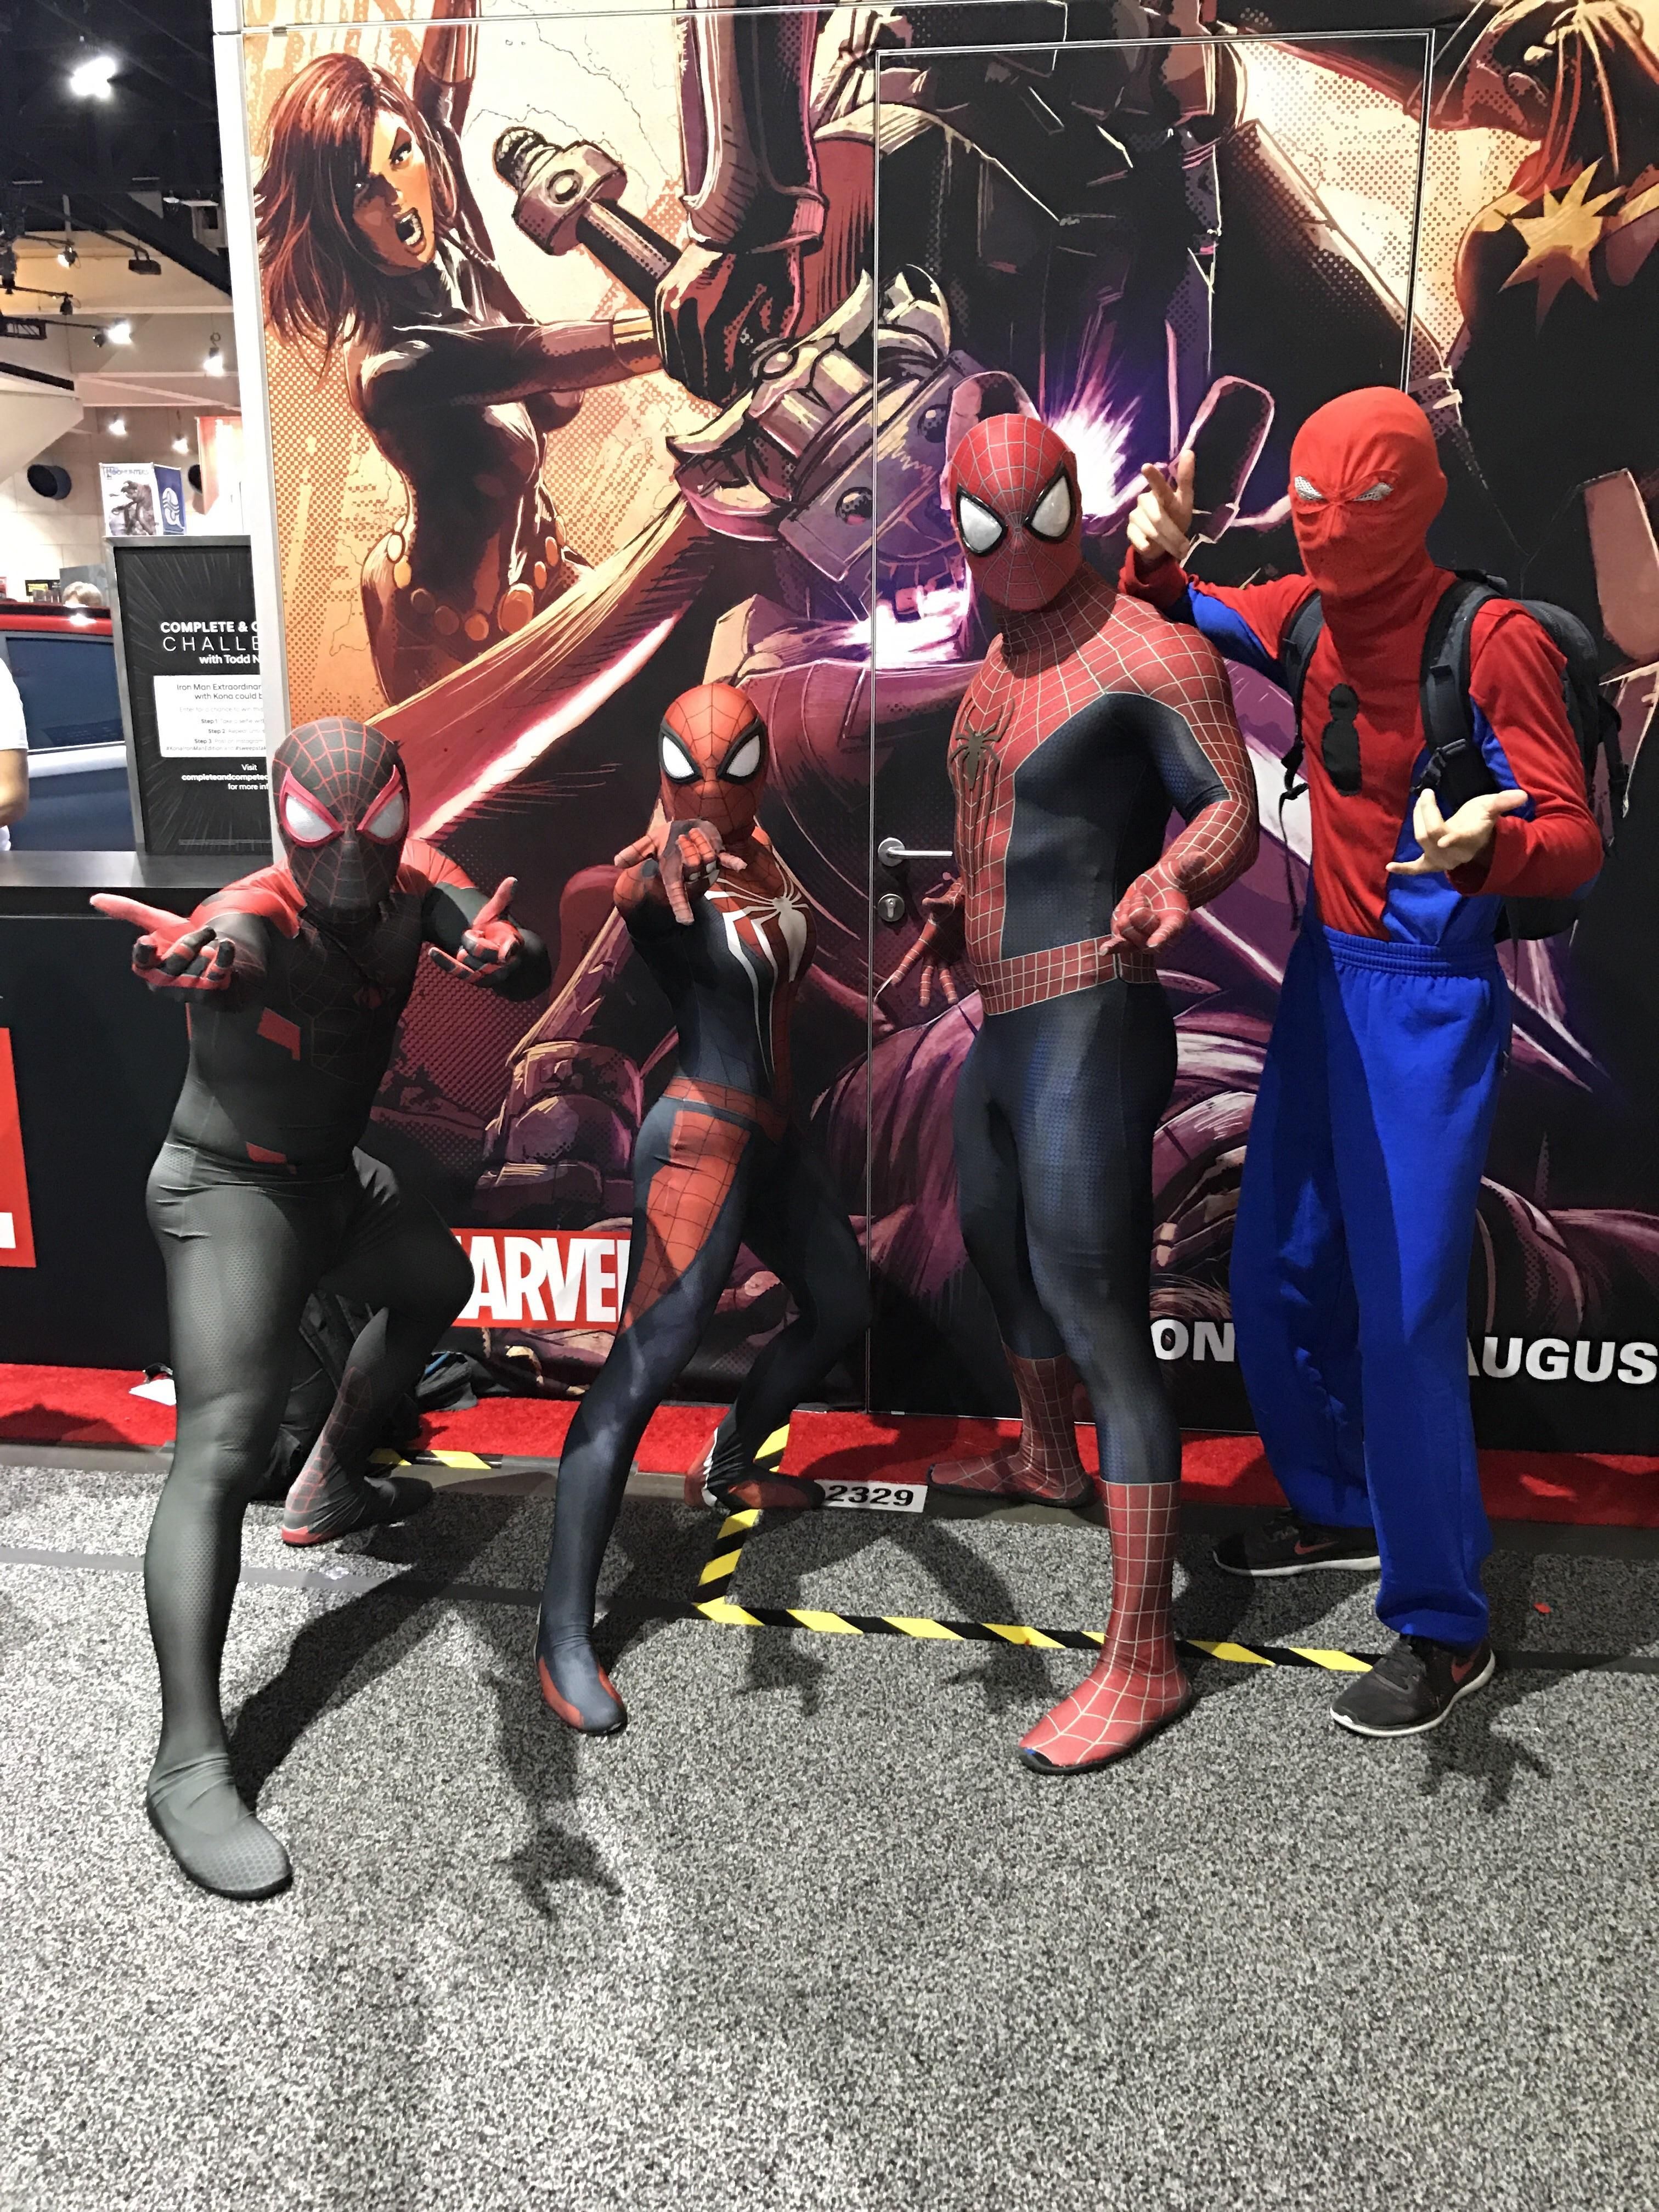 We asked the 3 of them to take a pic of their awesome costumes and this guy jumped in...